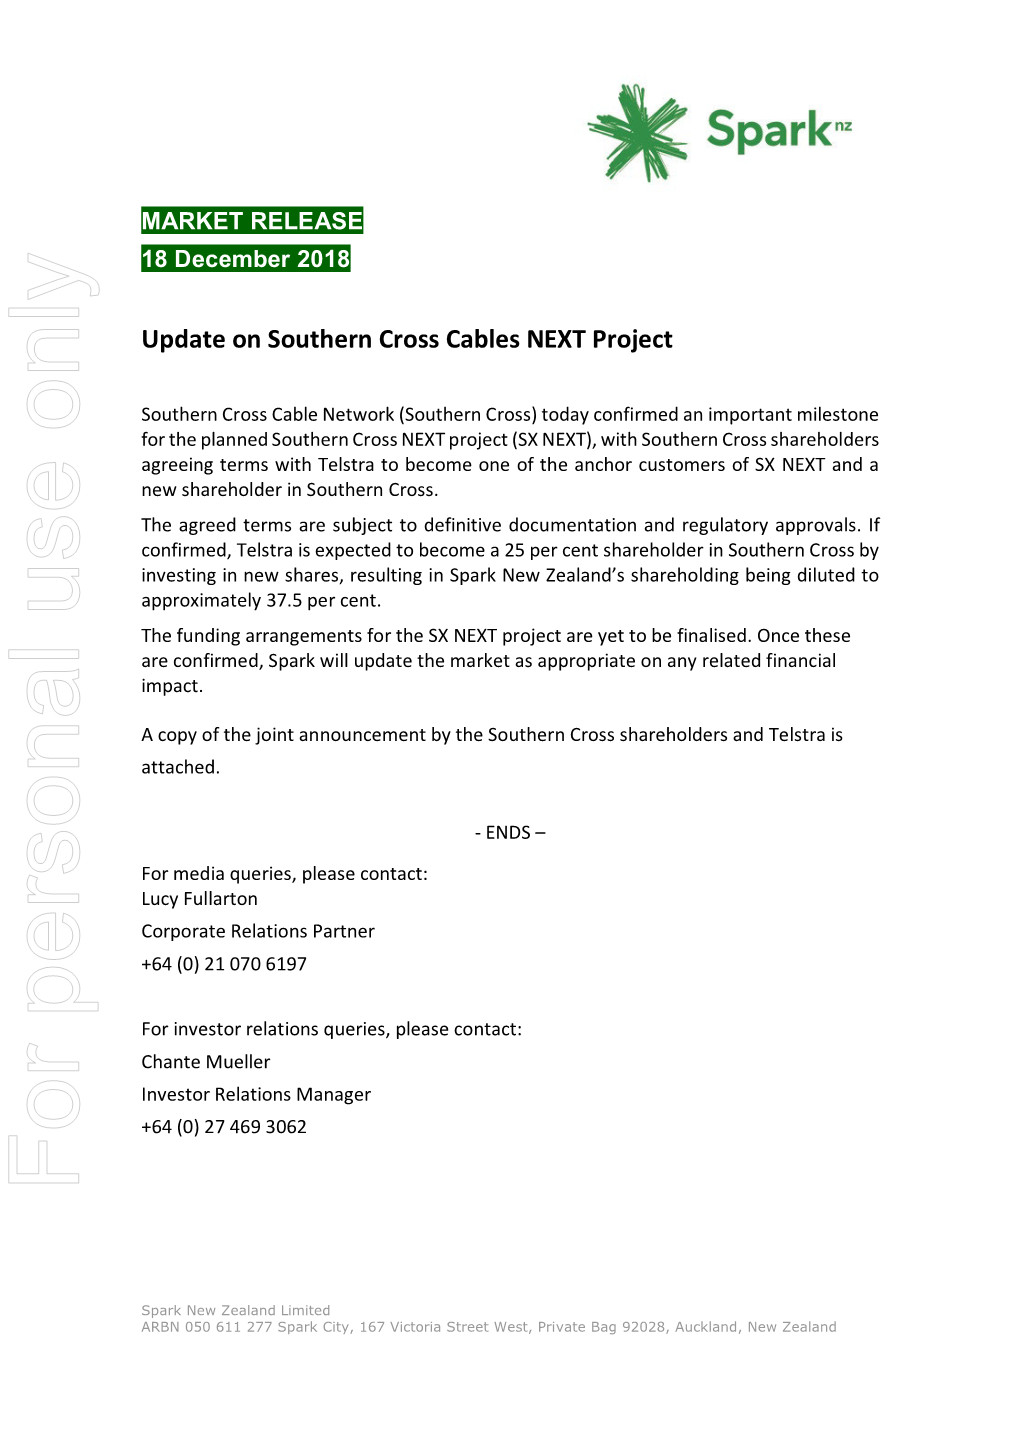 Update on Southern Cross Cables NEXT Project